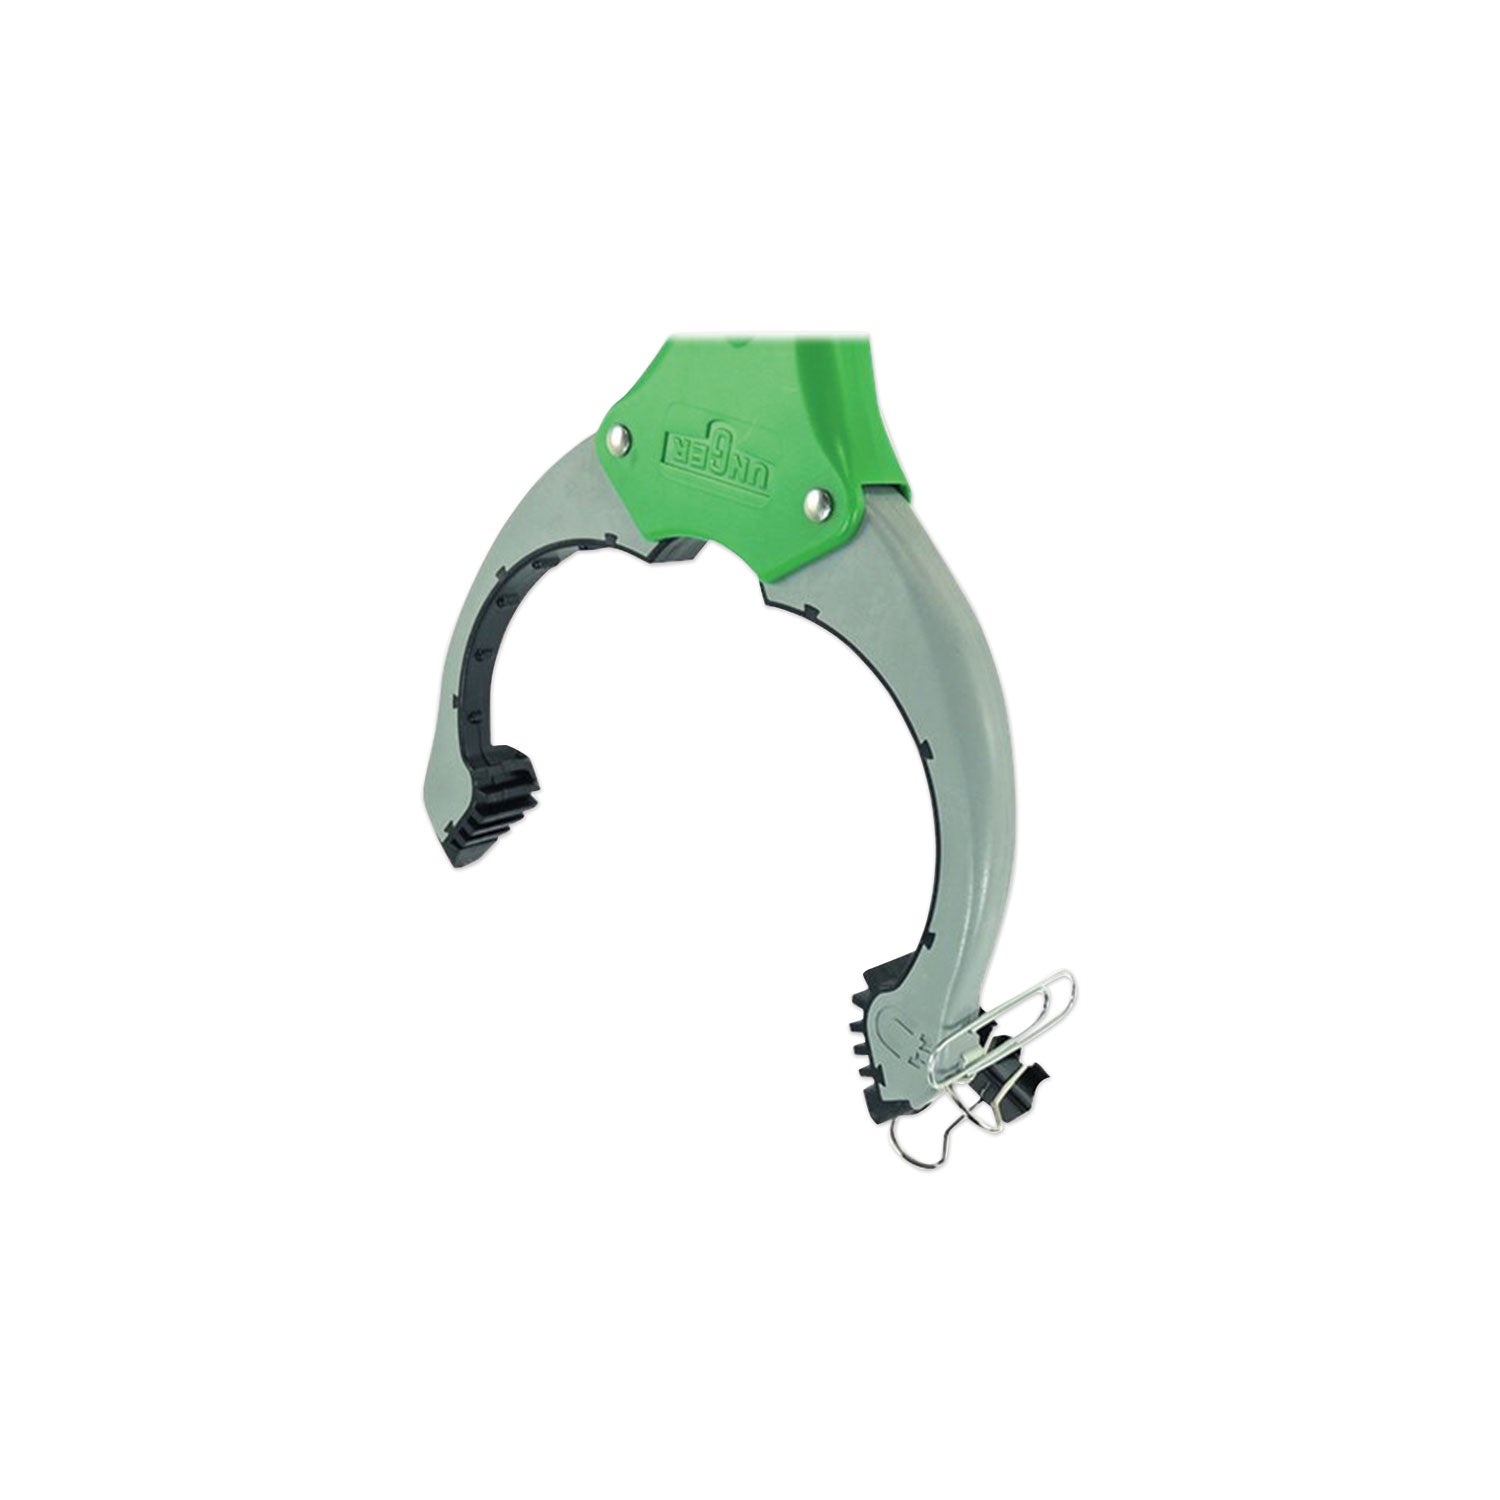 nifty-nabber-trigger-grip-extension-arm-3654-silver-green_ungnt090 - 2